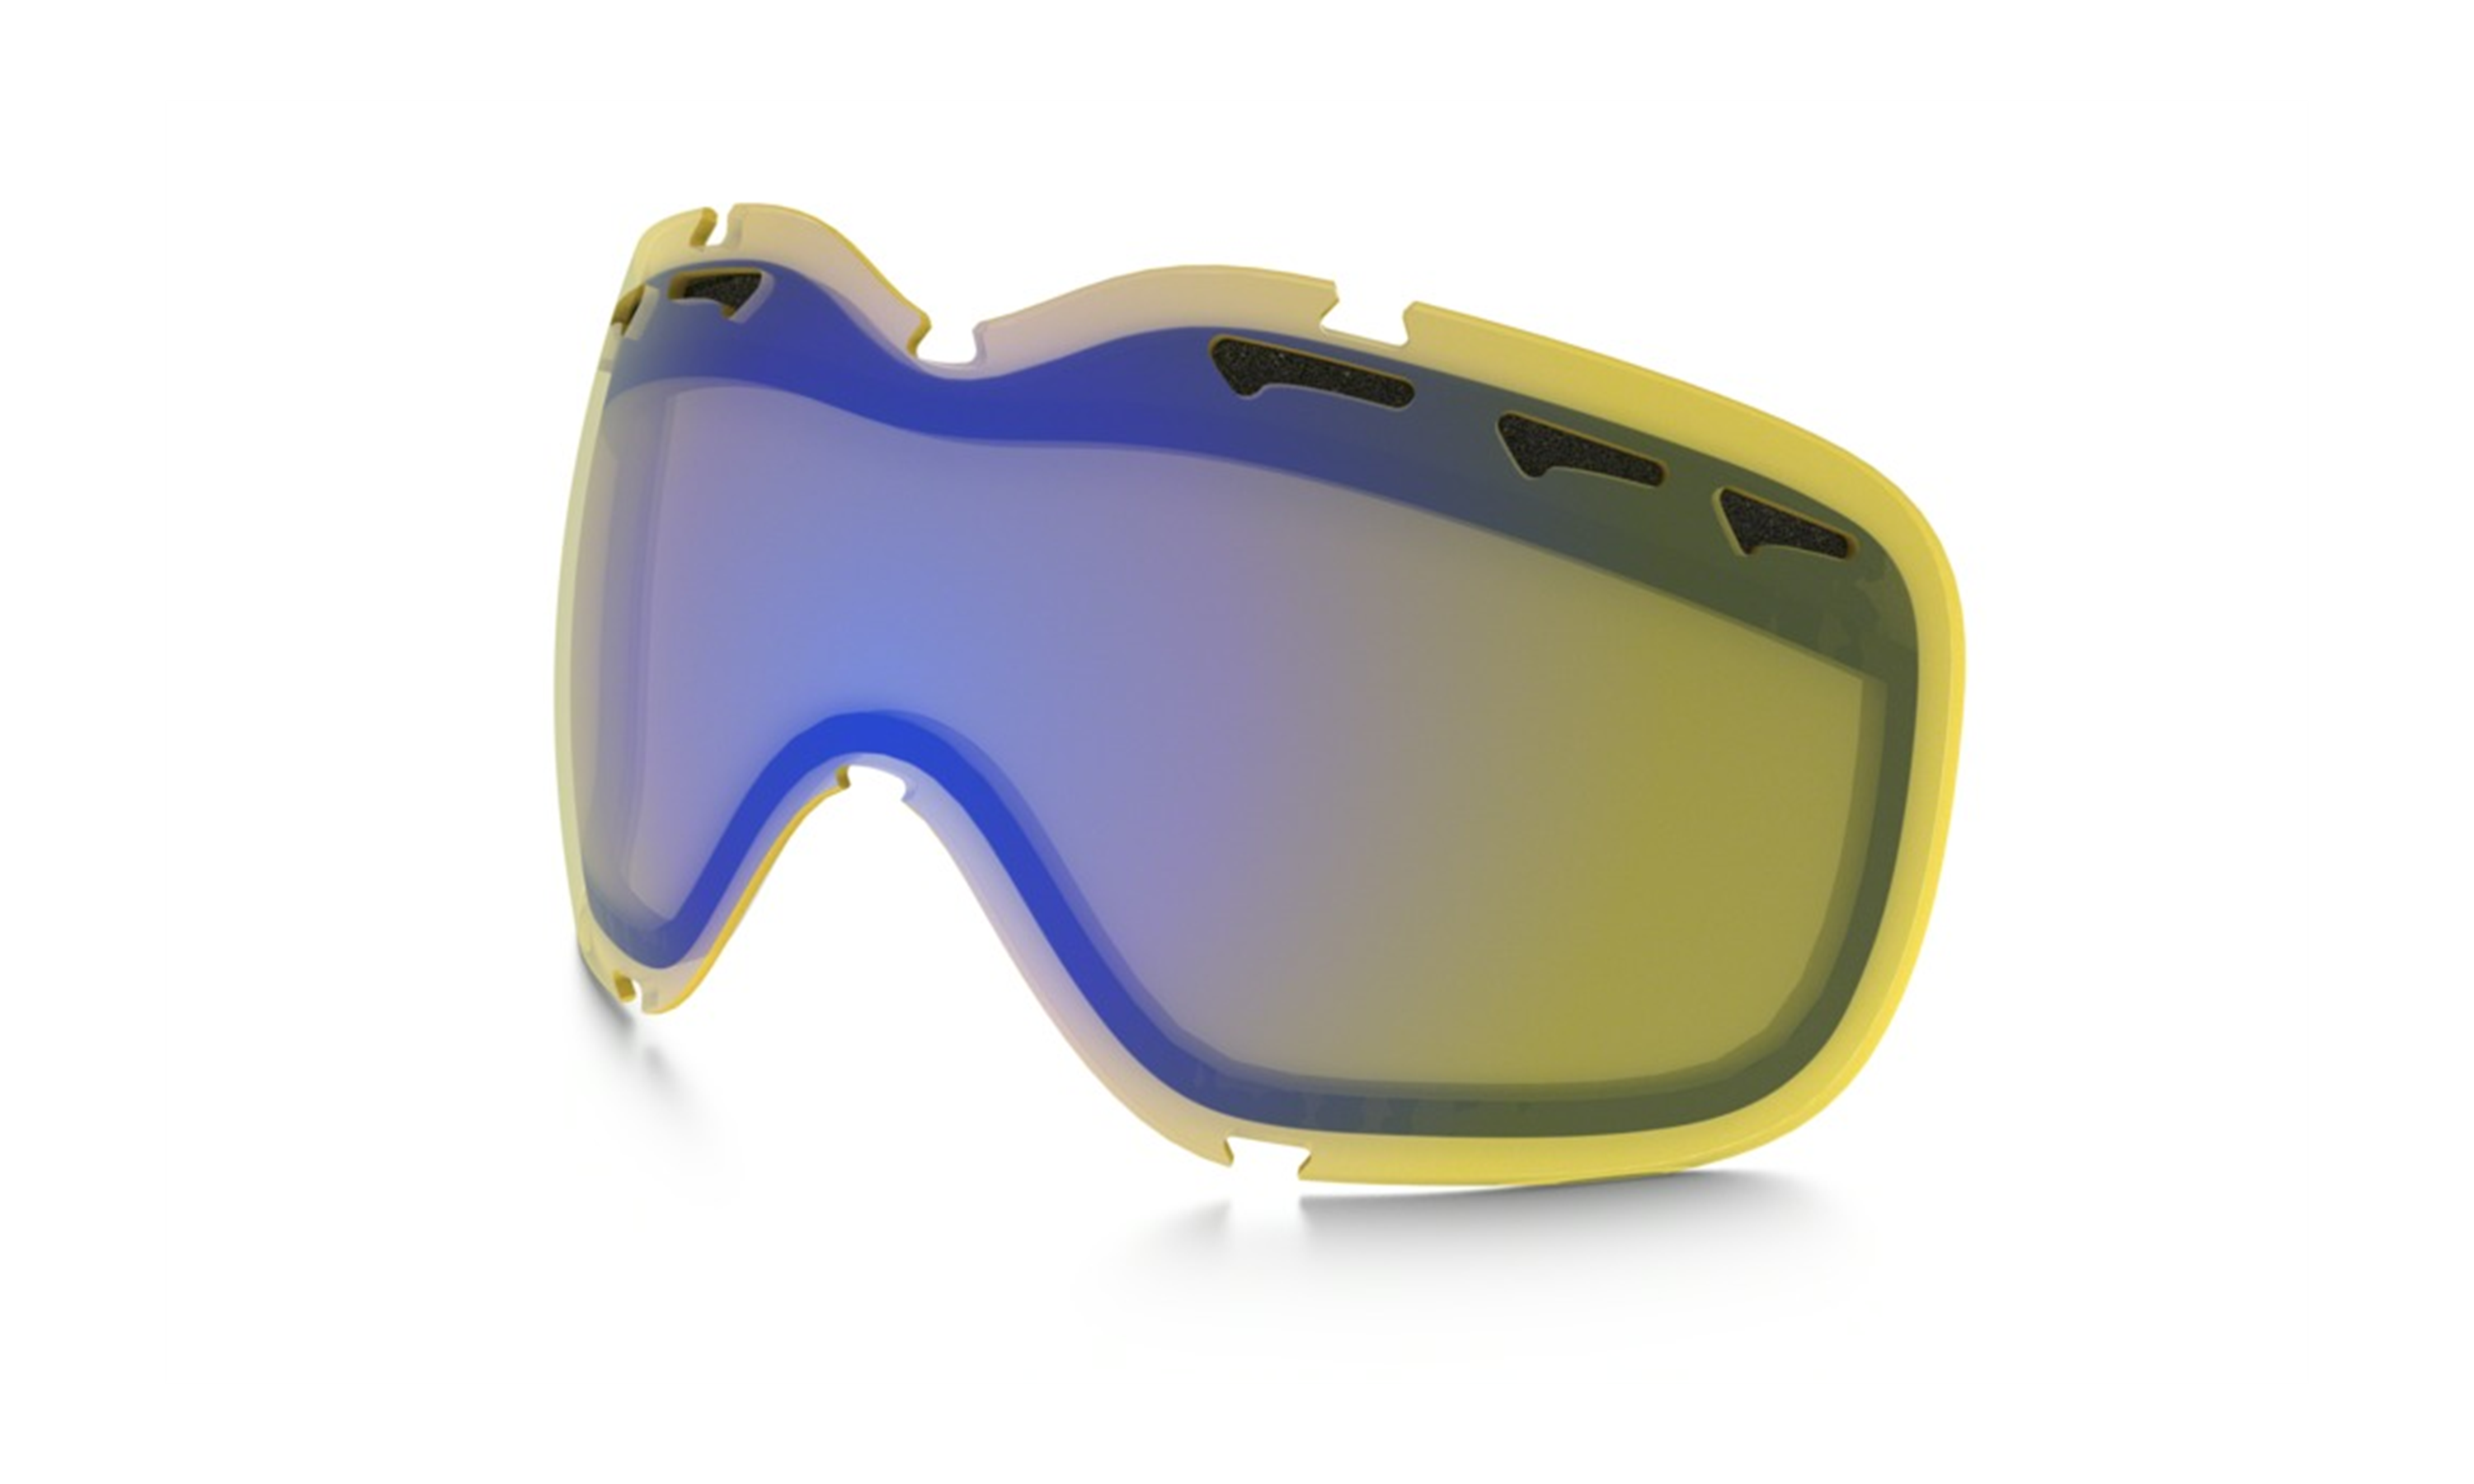 oakley goggles replacement lenses